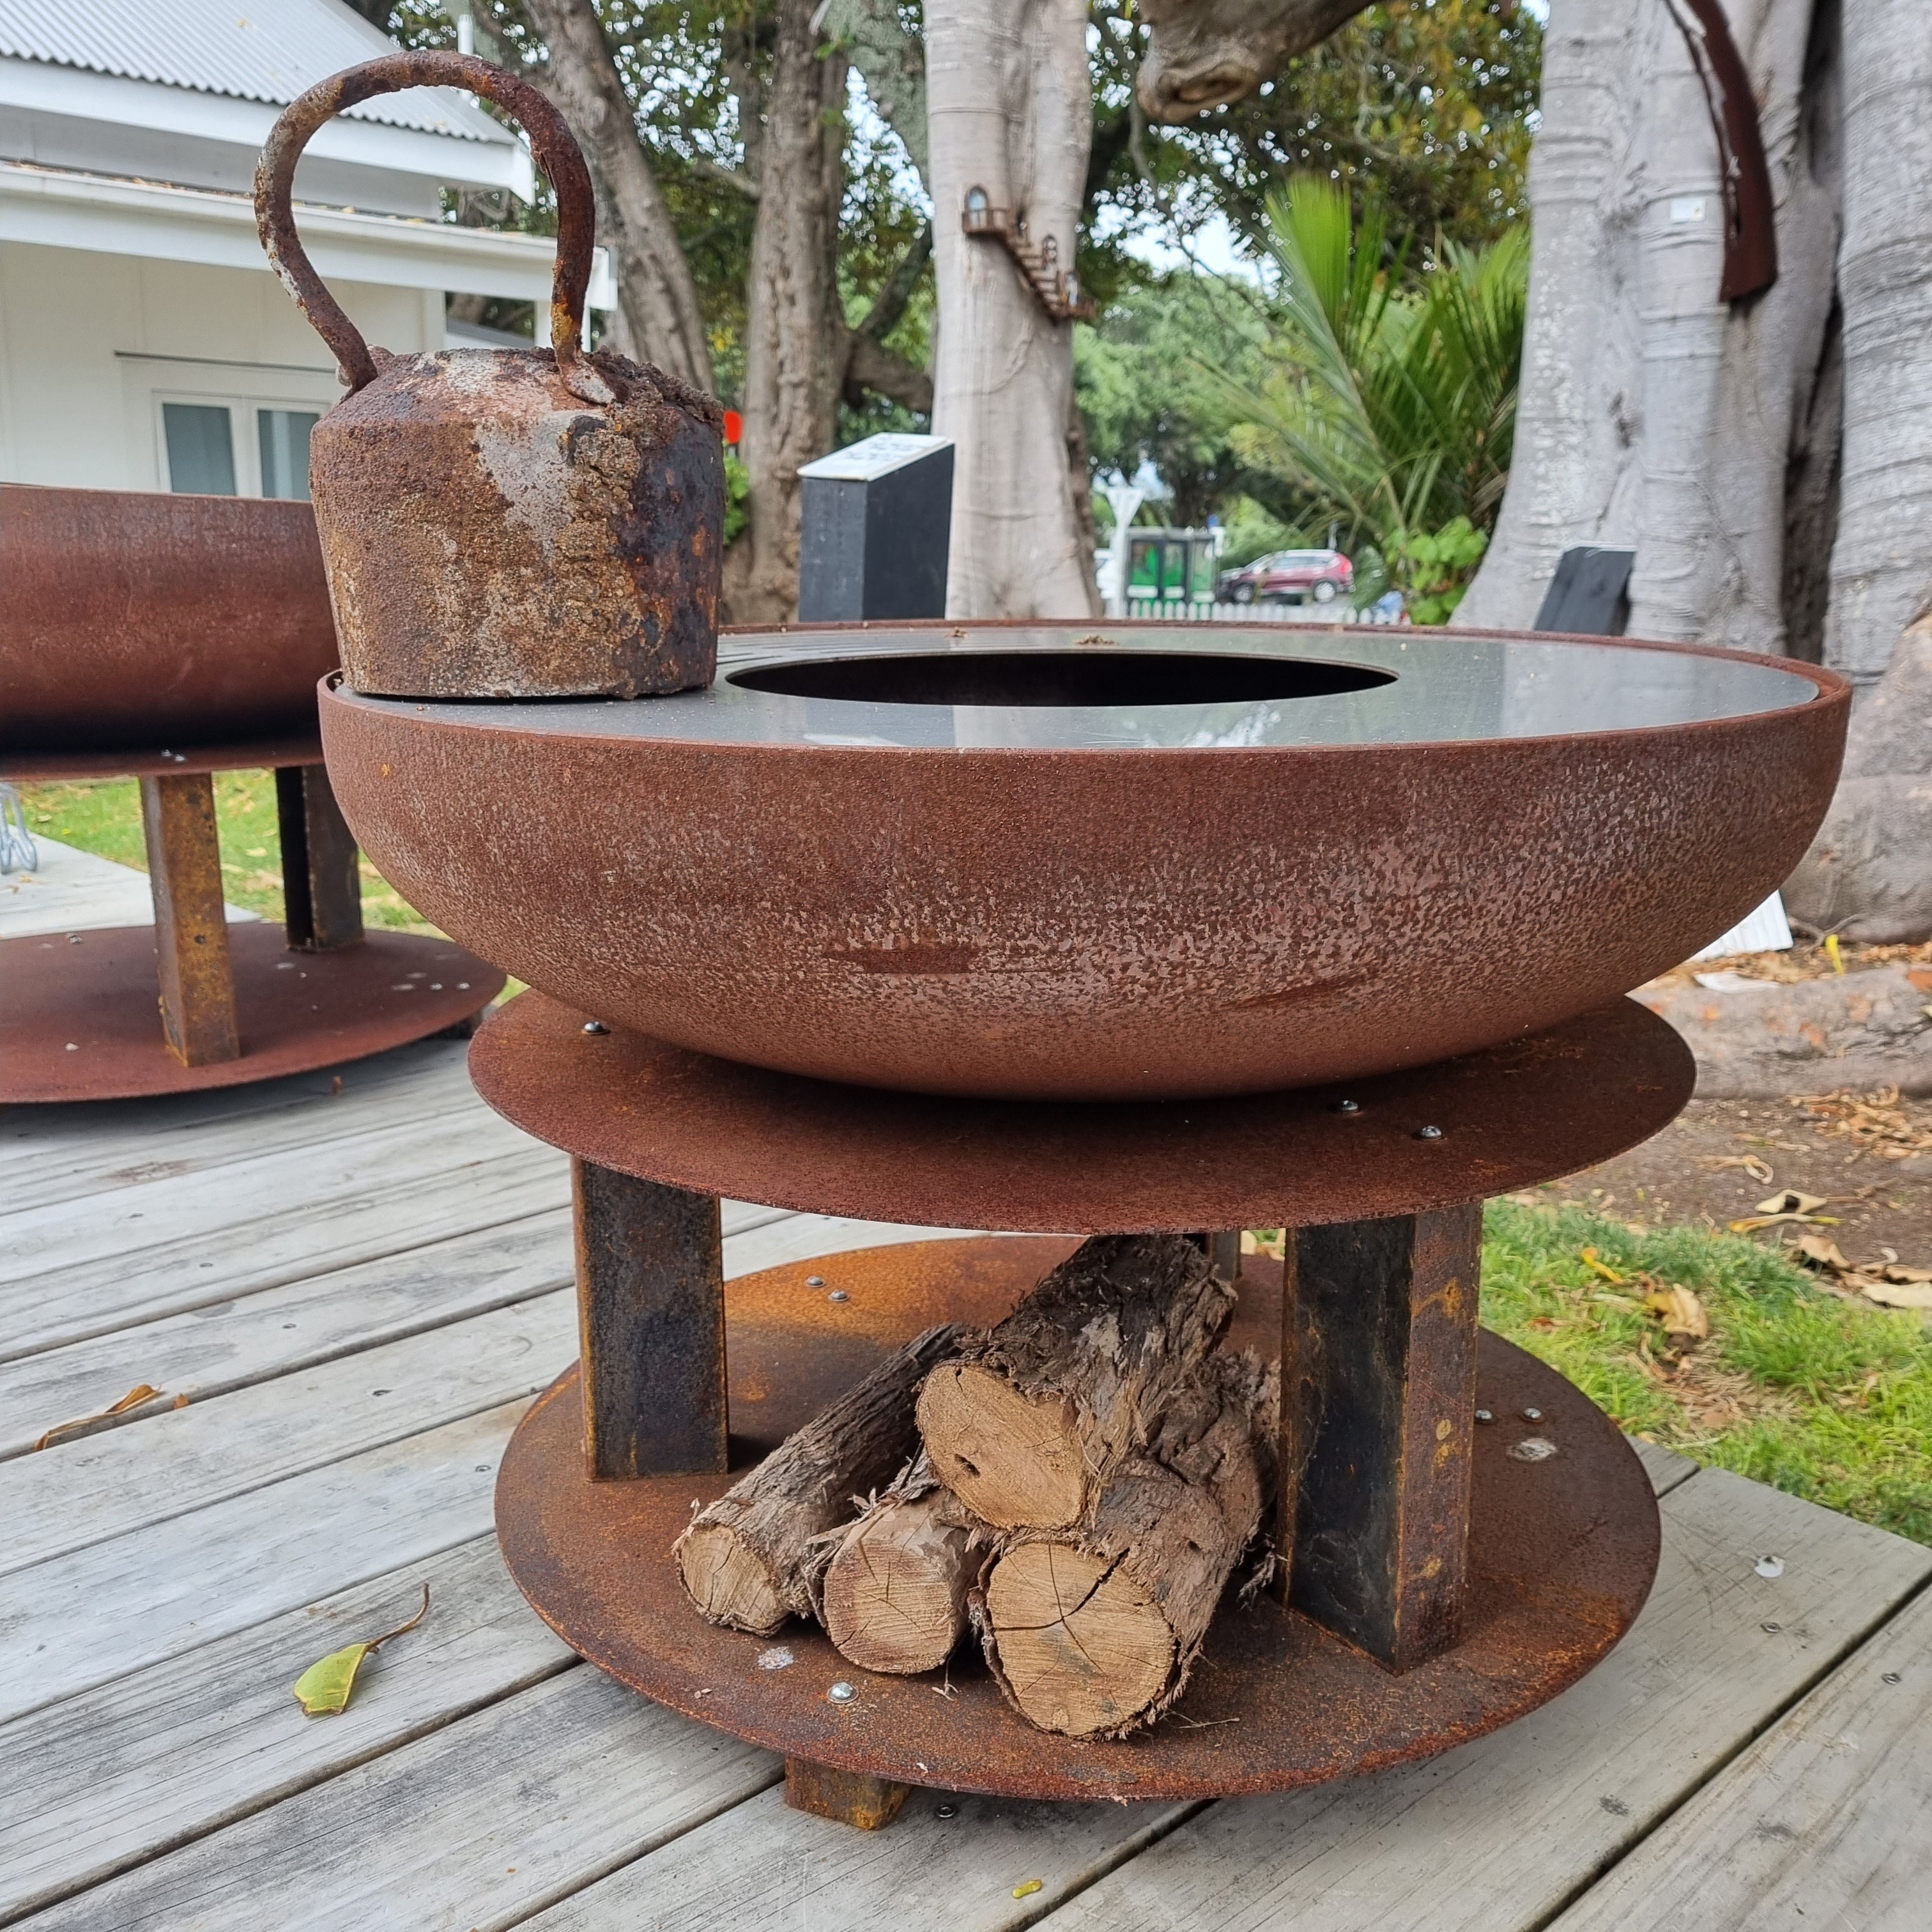 The Awhitu 750 Fire Bowl with woodstorage and cooktop